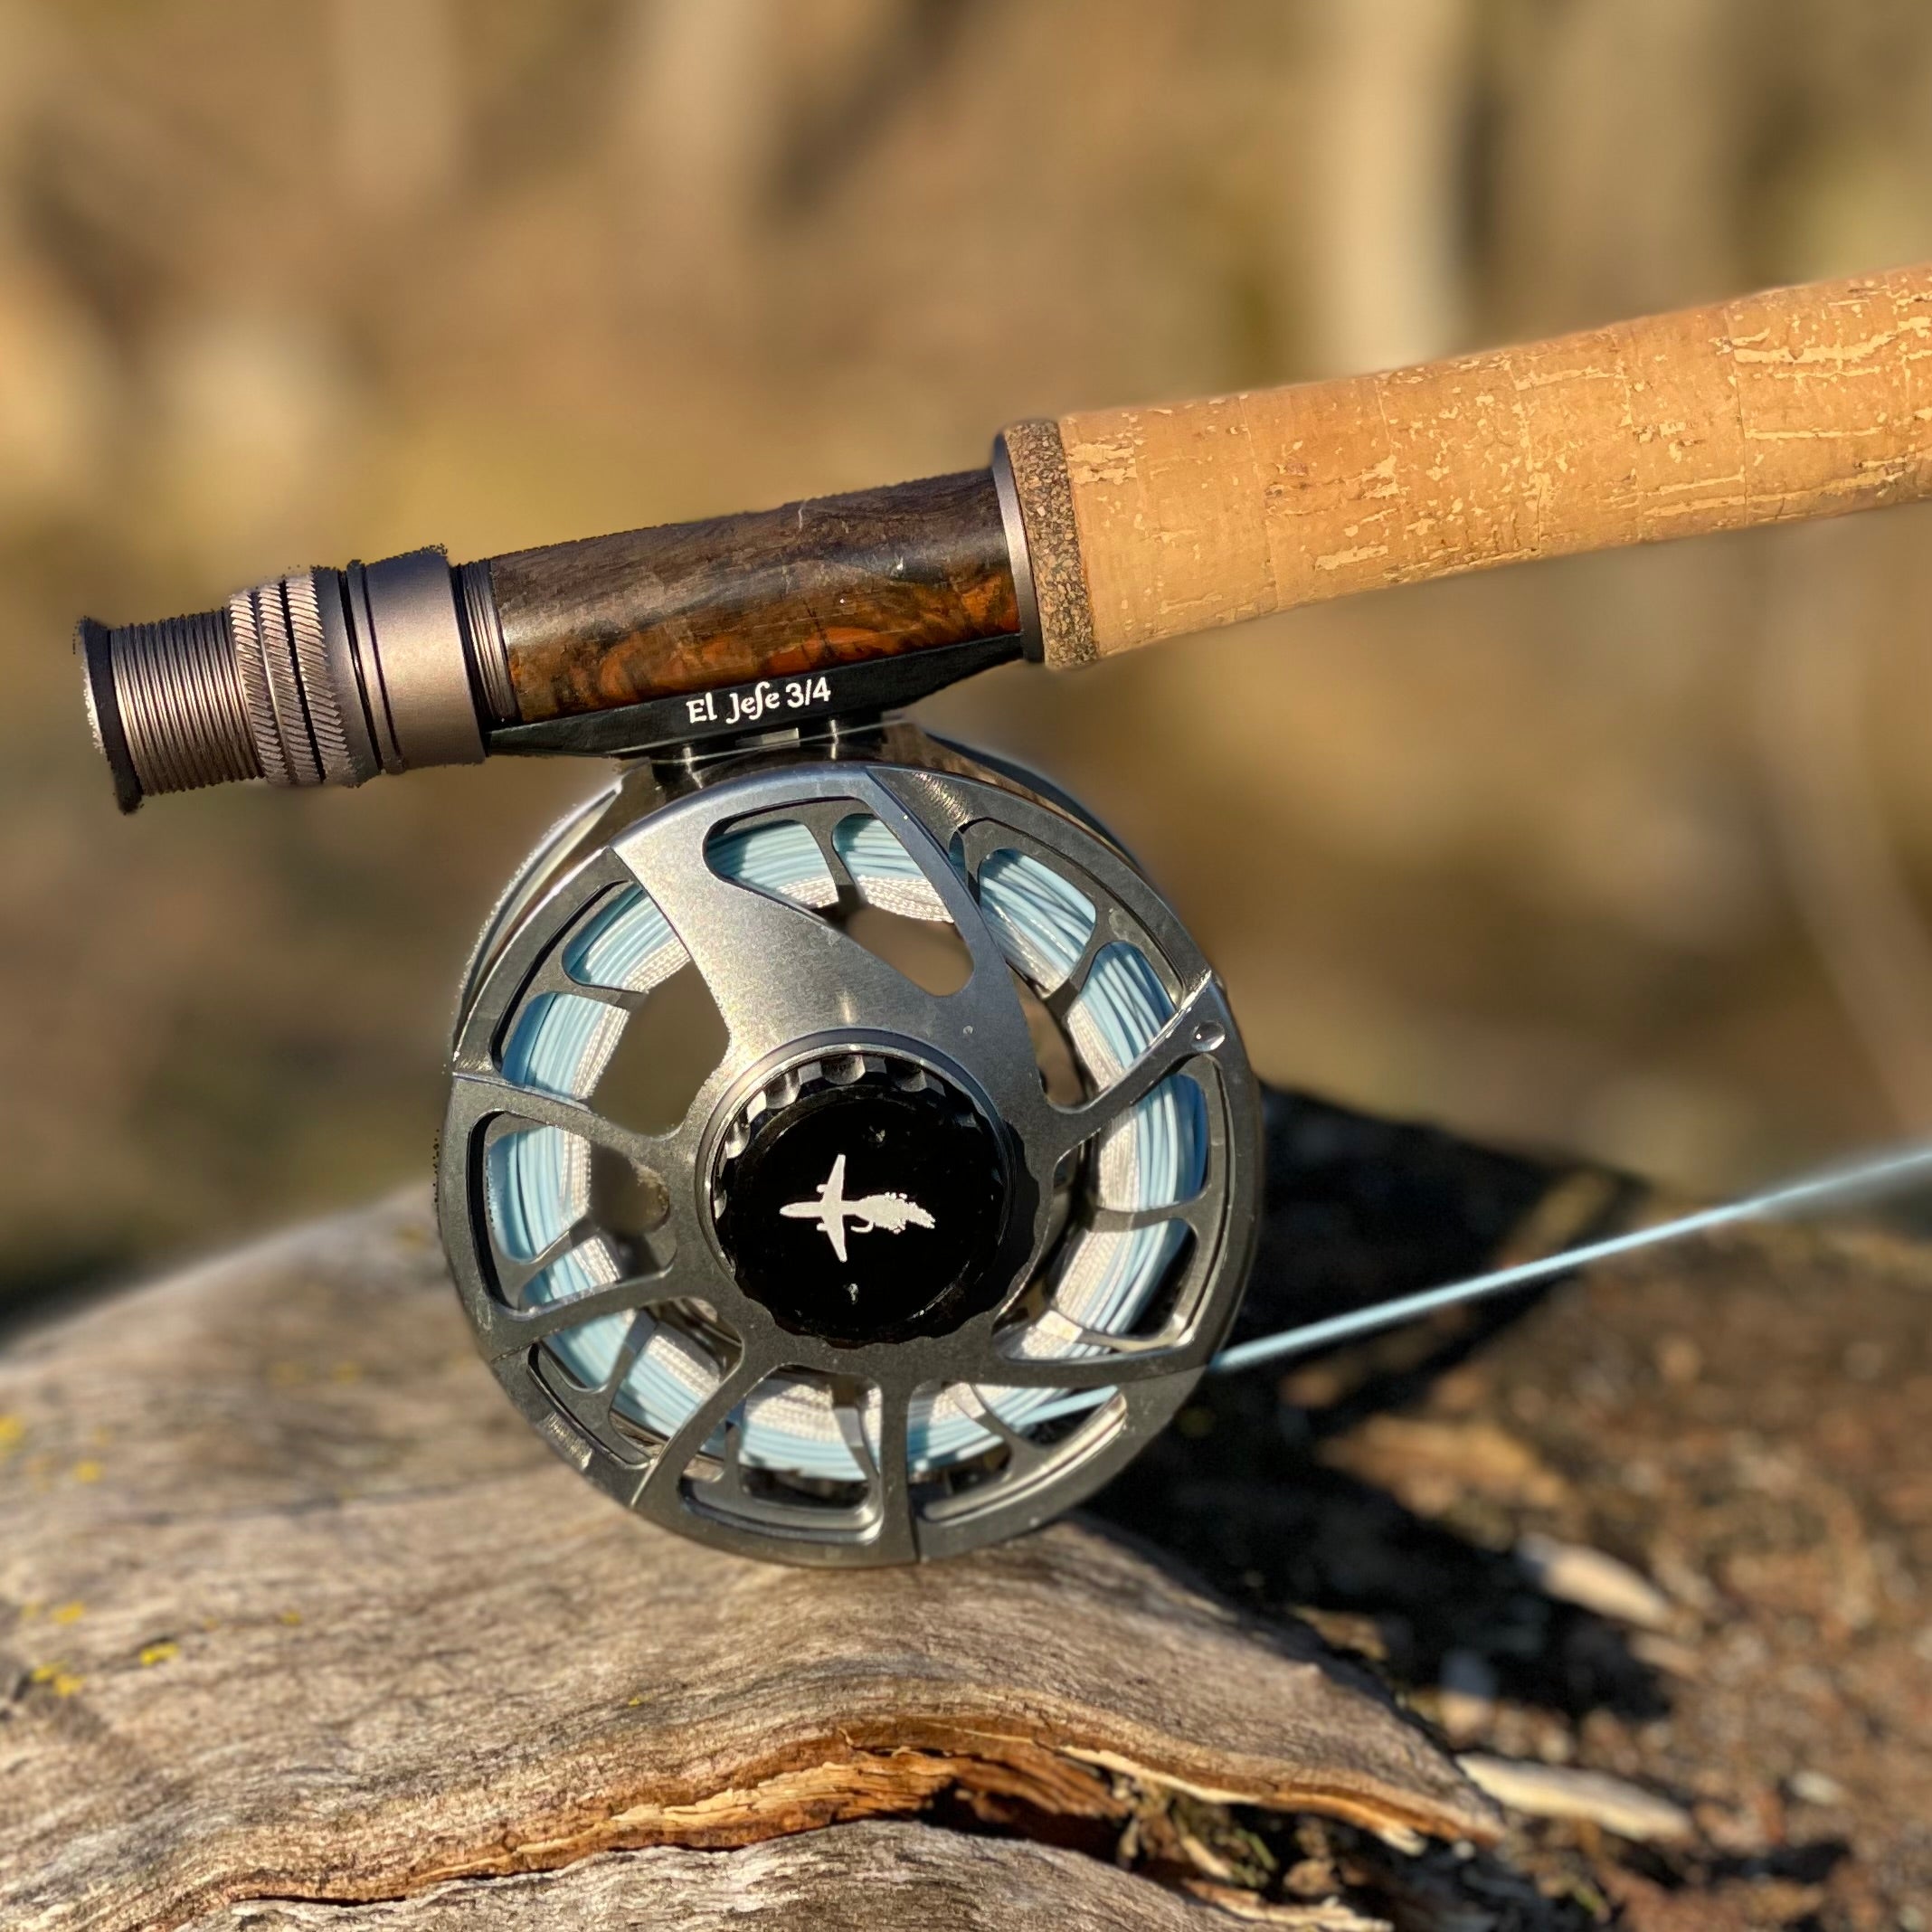 El Jefe Fly Fishing Combo Package | 864-4 | 8'6" Four Section 4 Weight Fly Rod And Reel Outfit